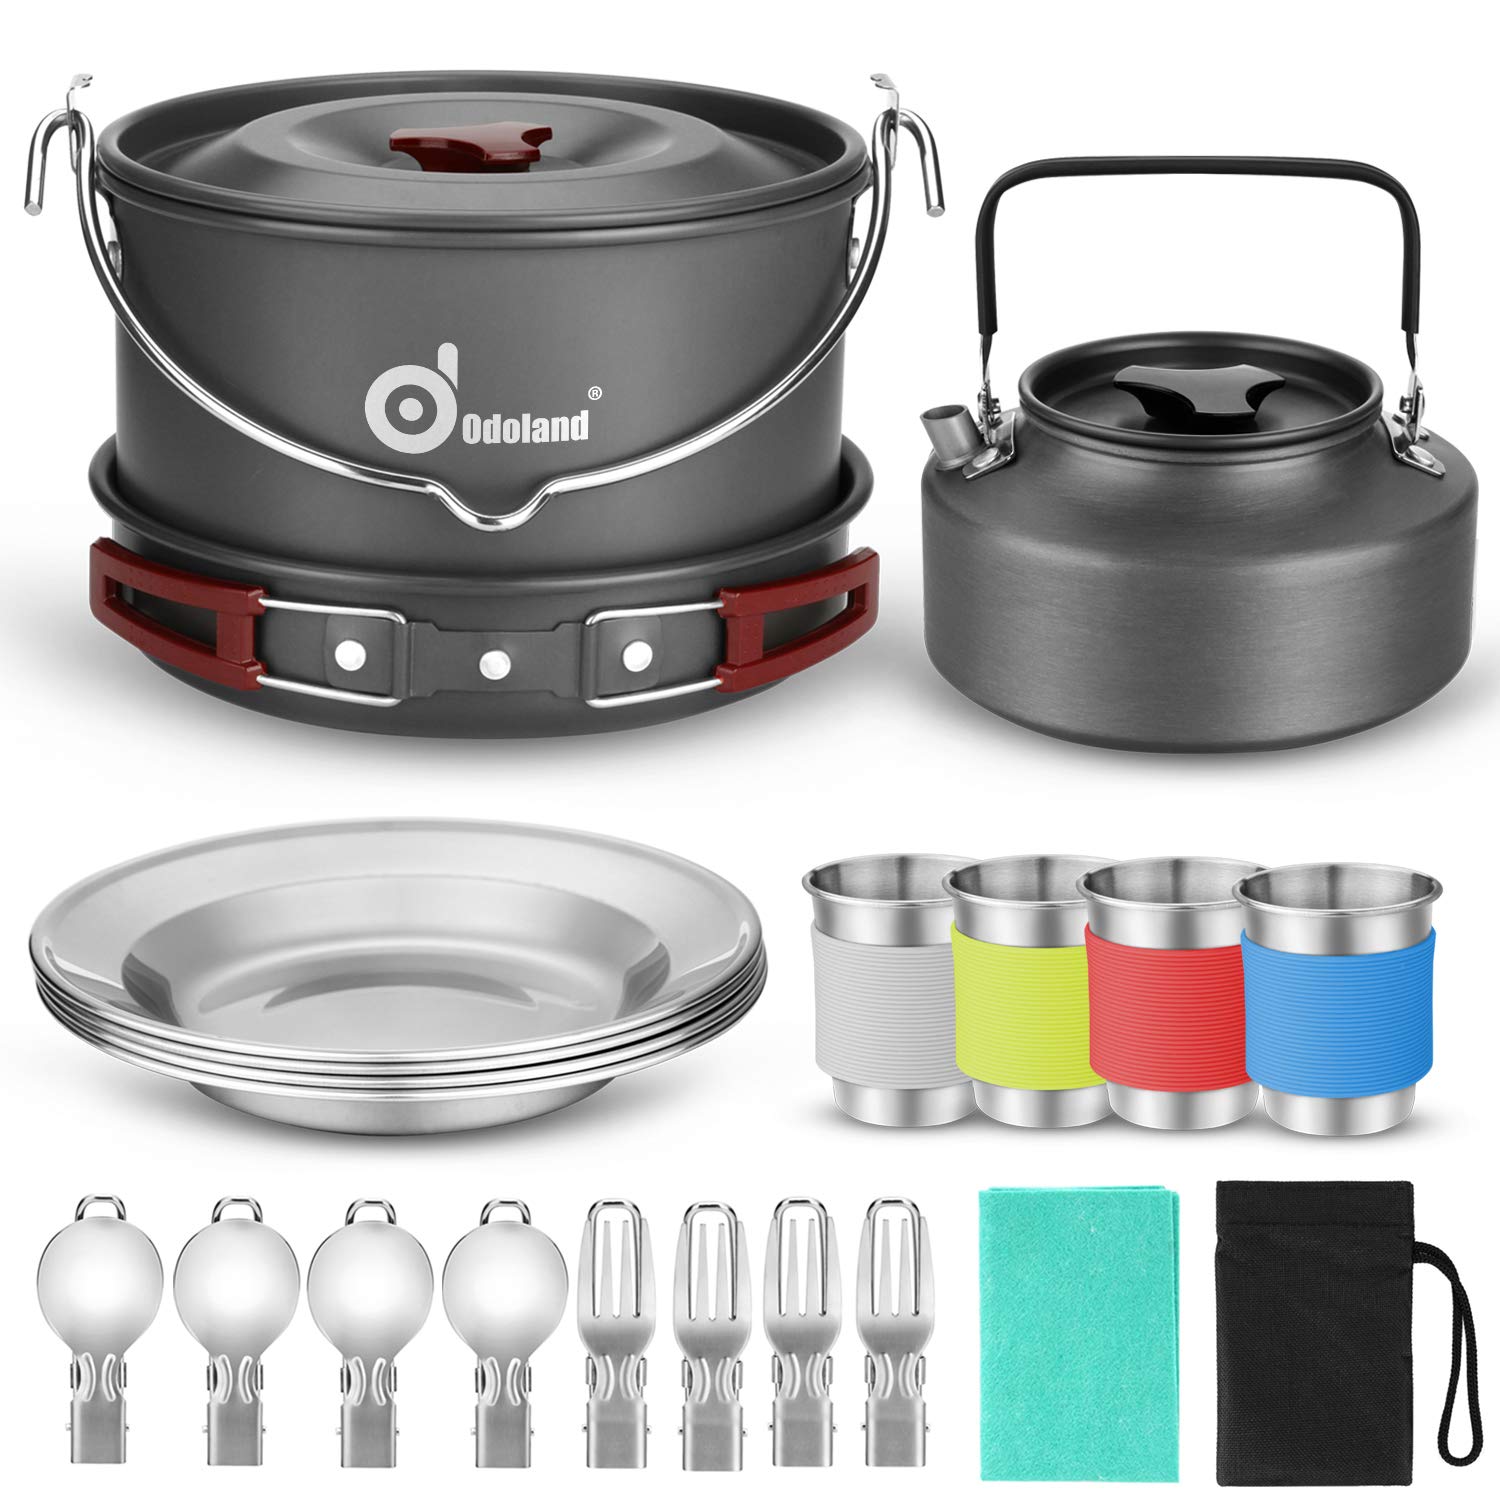 Odoland Camping Cookware Kit for 3-4 People Portable Stainless steel Cooking Set for Campfire Backpacking Pans and Pots Plates Kettle Gear for Outdoor Hiking Picnic and Trekking